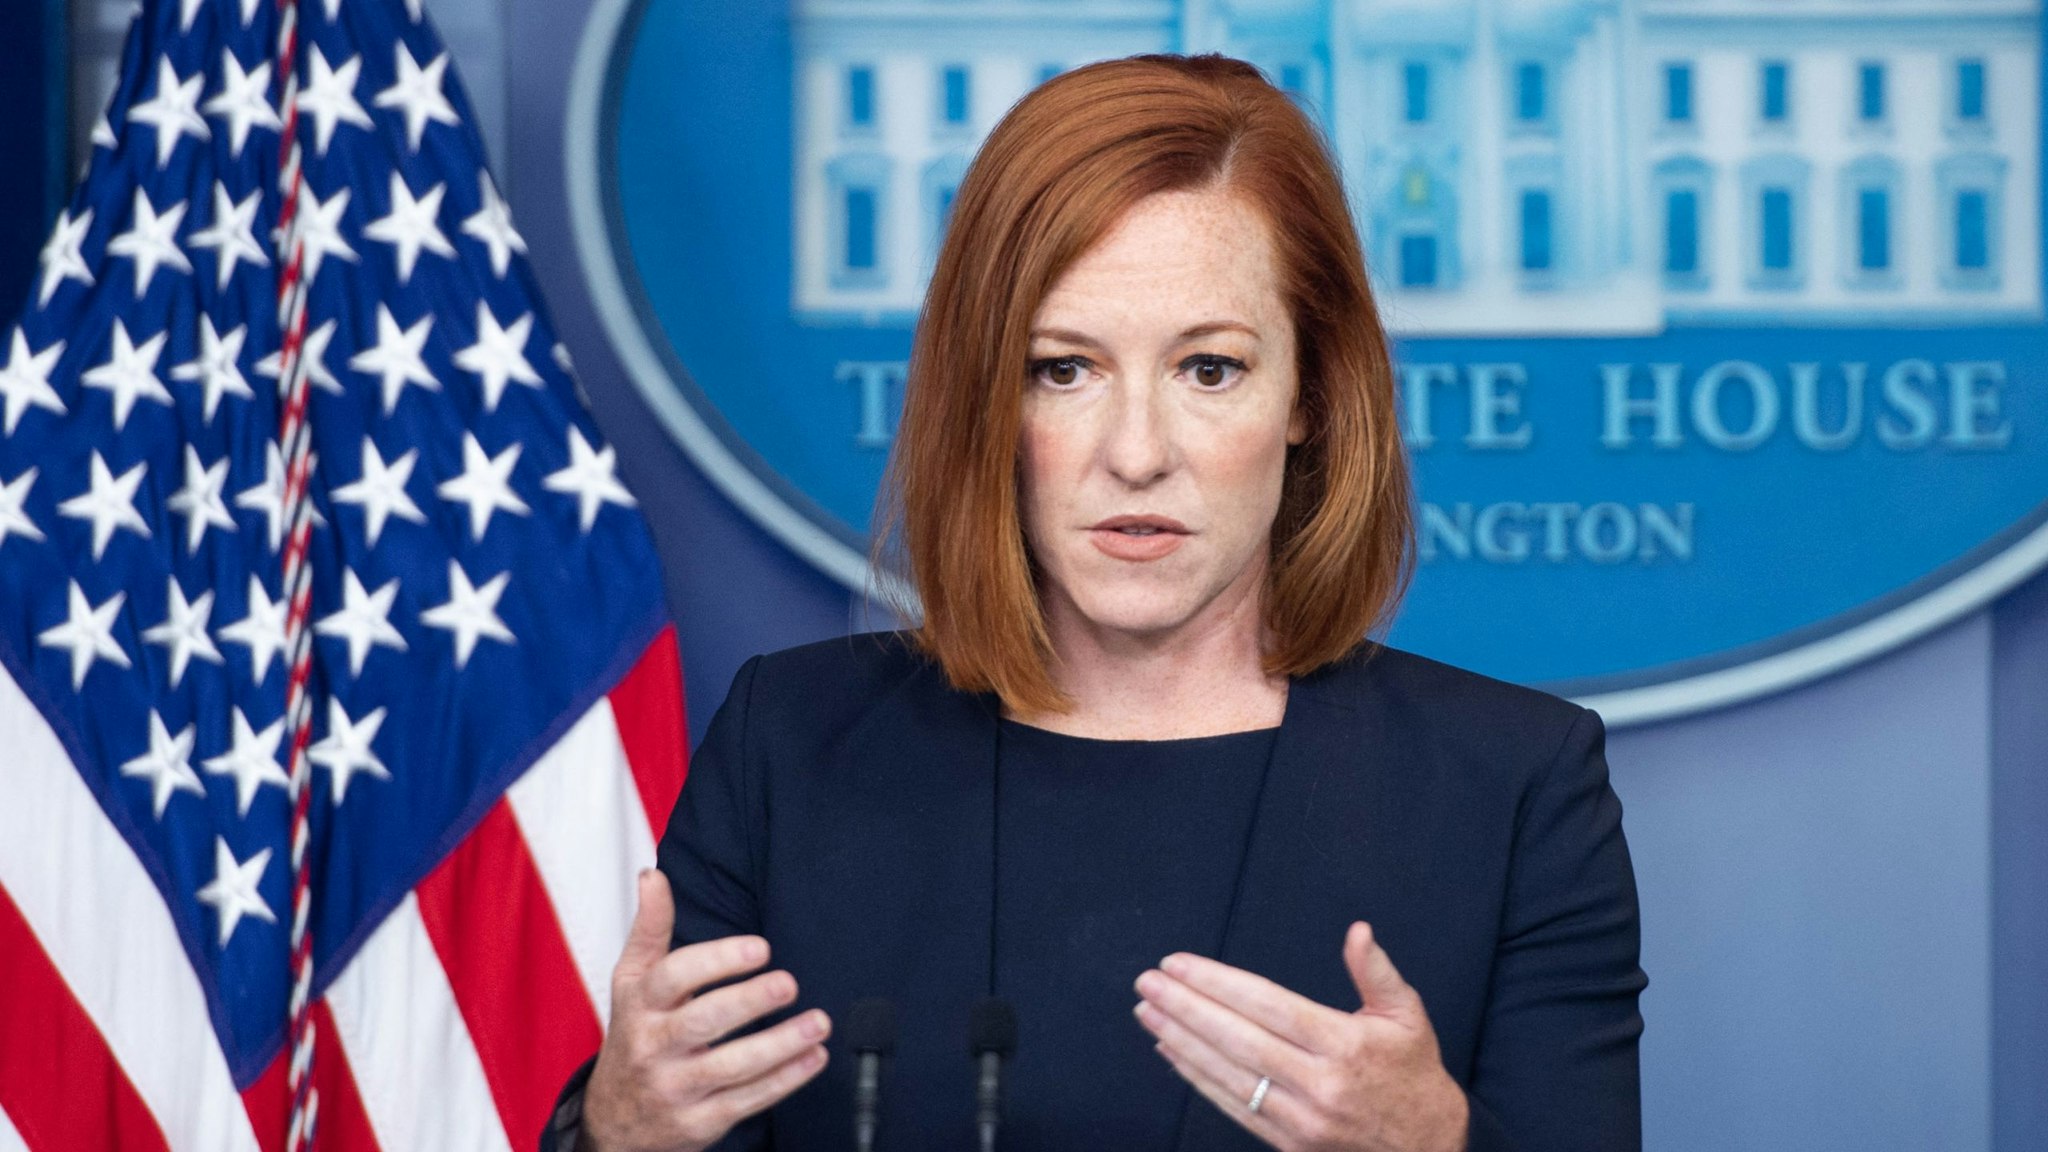 White House Press Secretary Jen Psaki speaks during a press briefing in the Brady Press Briefing Room at the White House in Washington, DC, July 12, 2021.